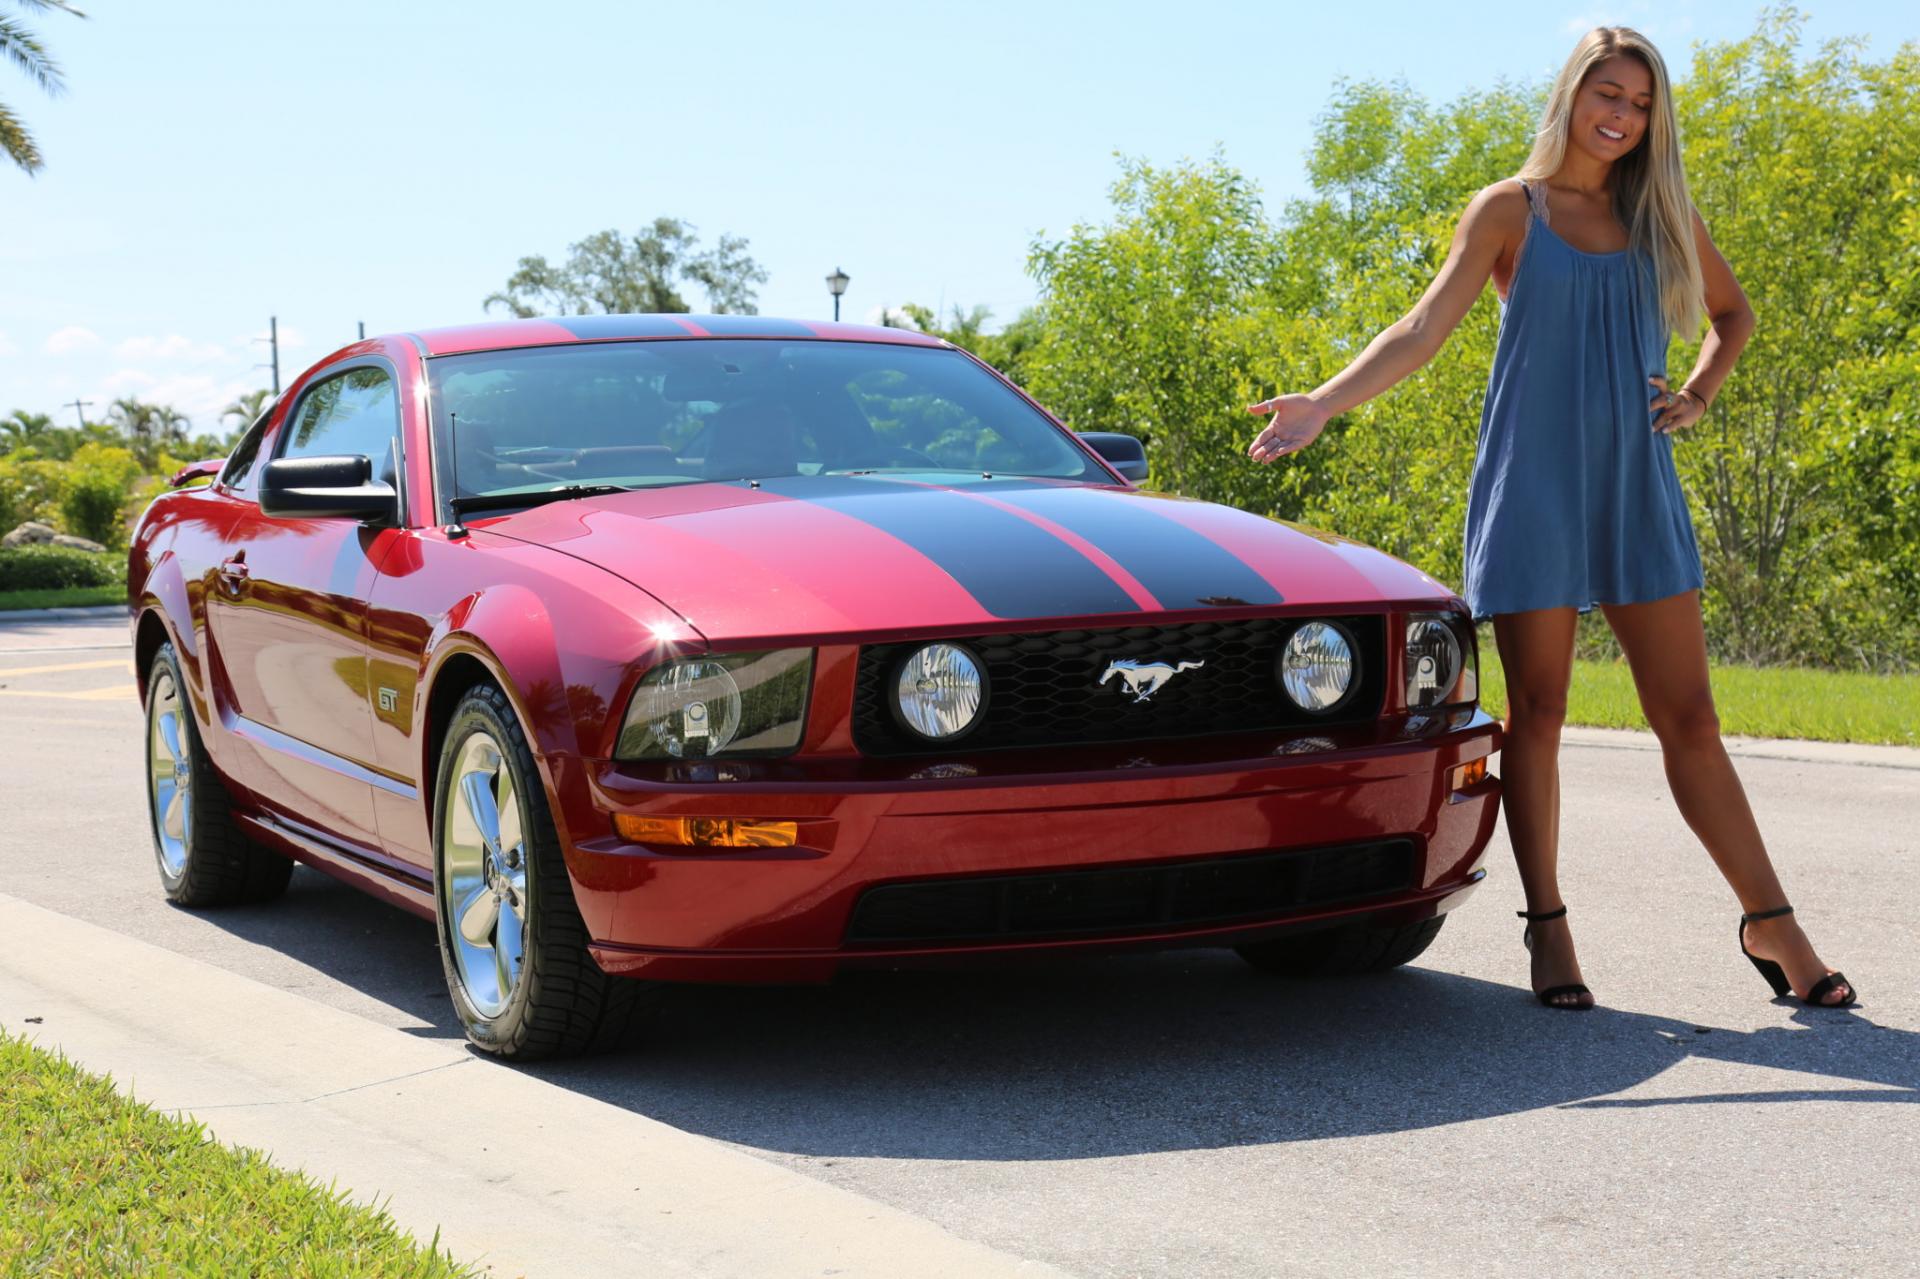 Used 2008 Ford Mustang For Sale ($16,500) | Muscle Cars for Sale Inc ...